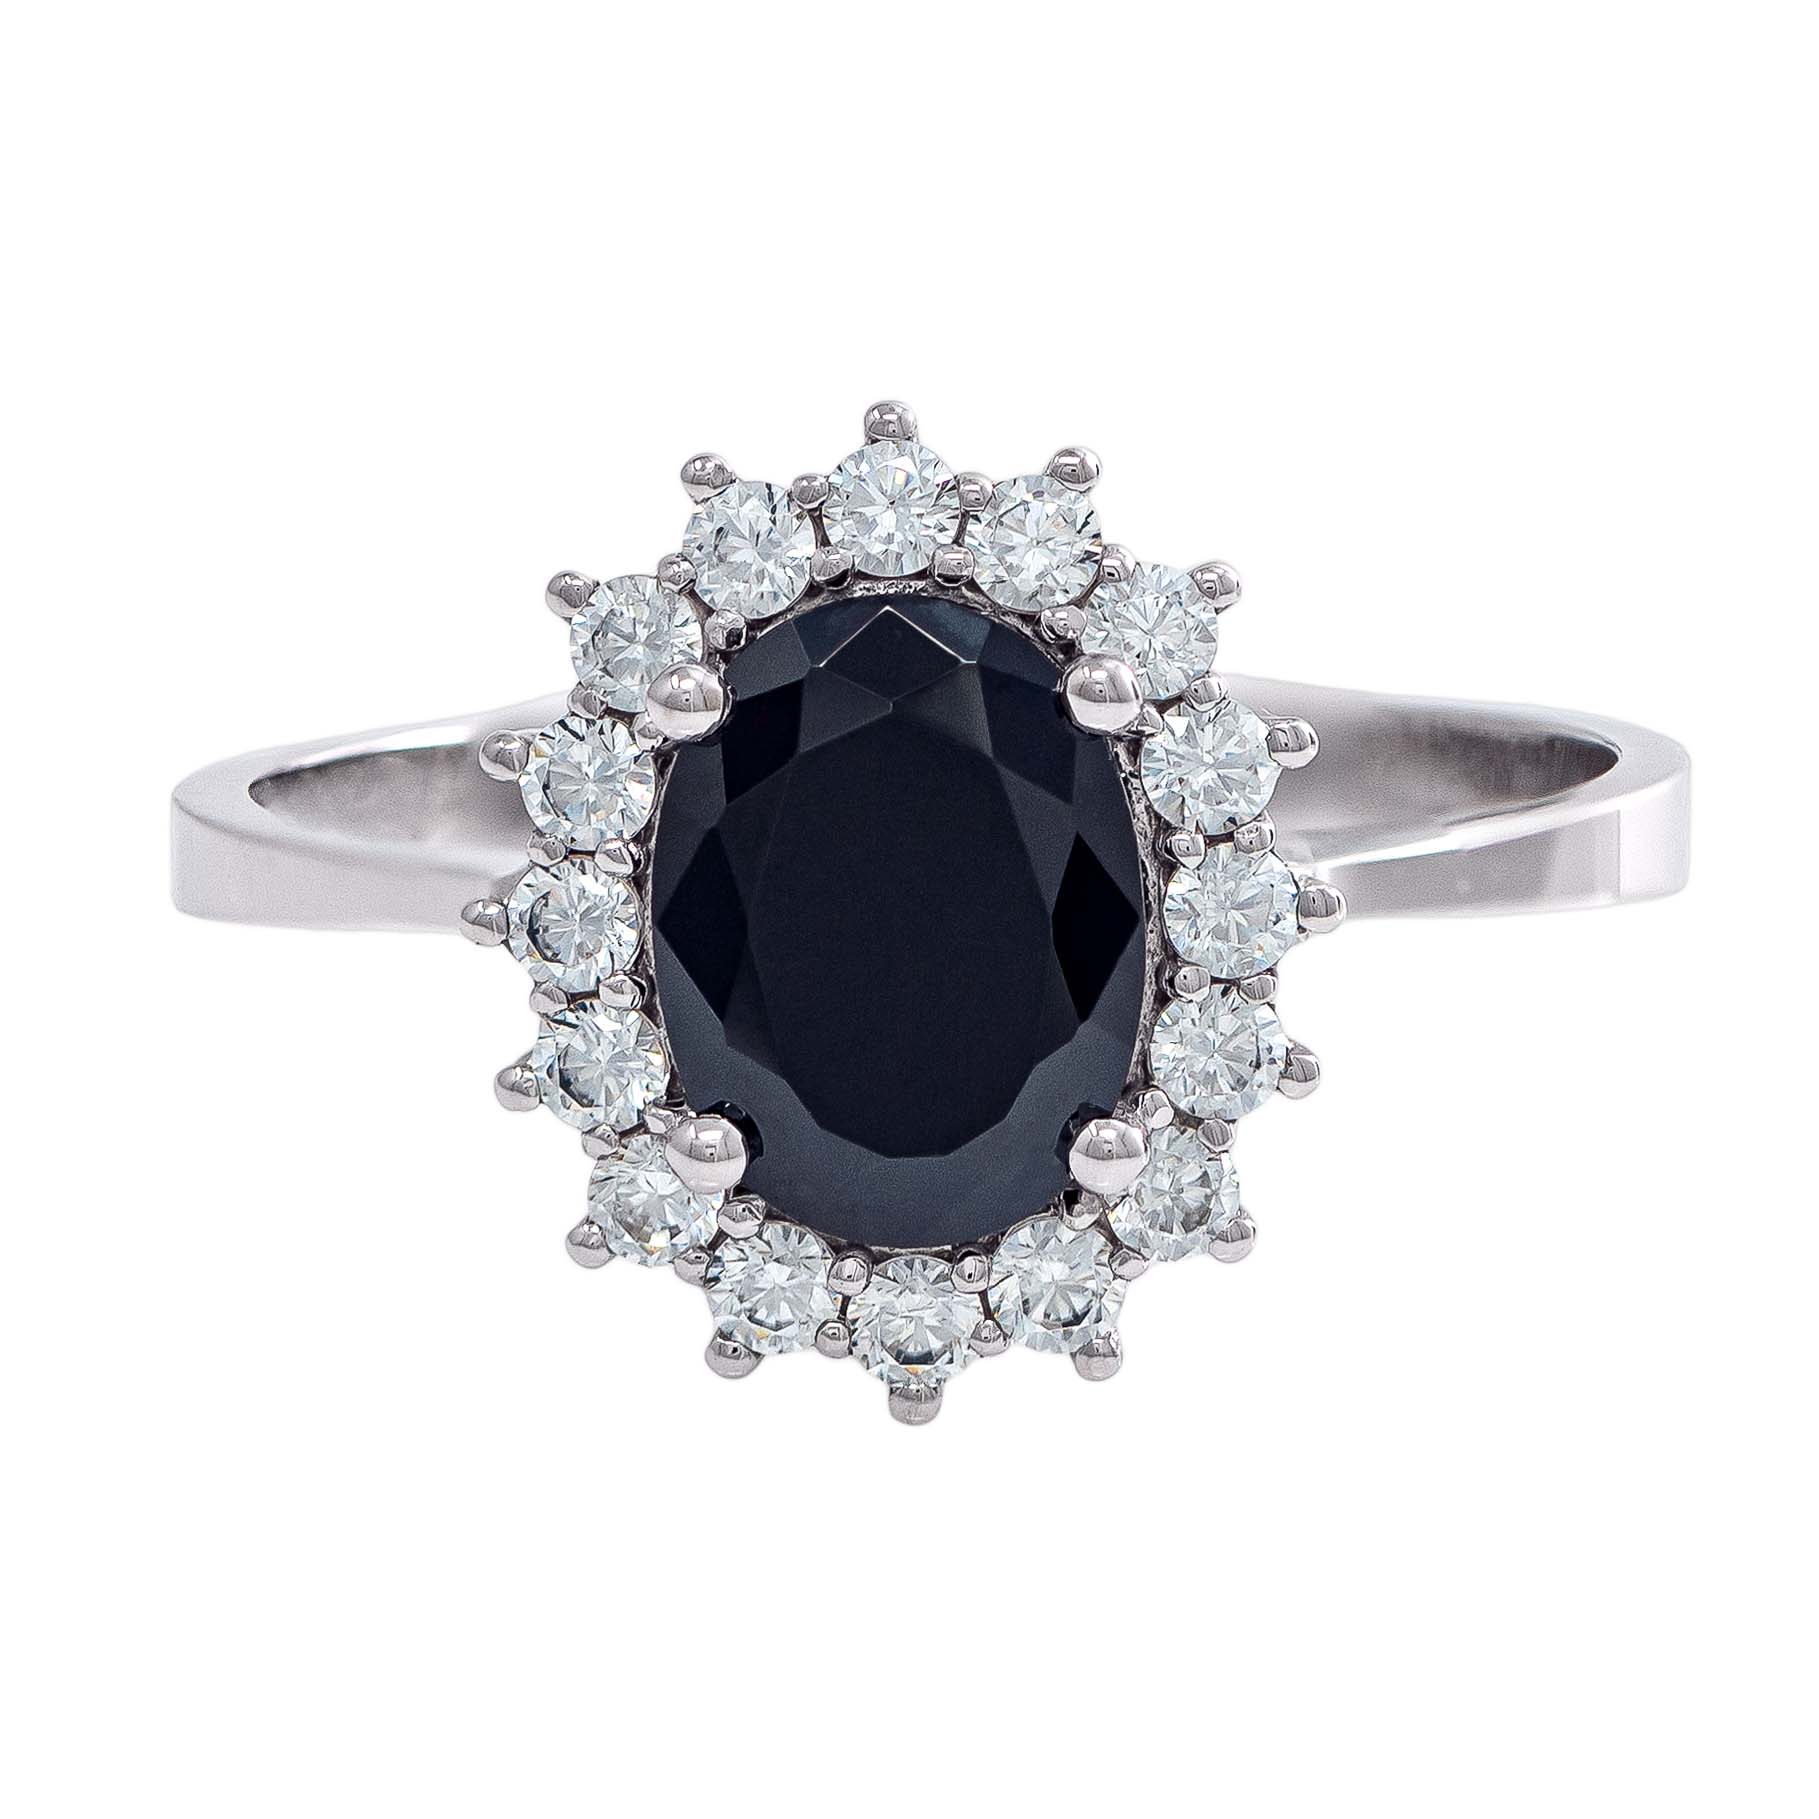 Ring in White Gold 9kt with Black and White Zirconia